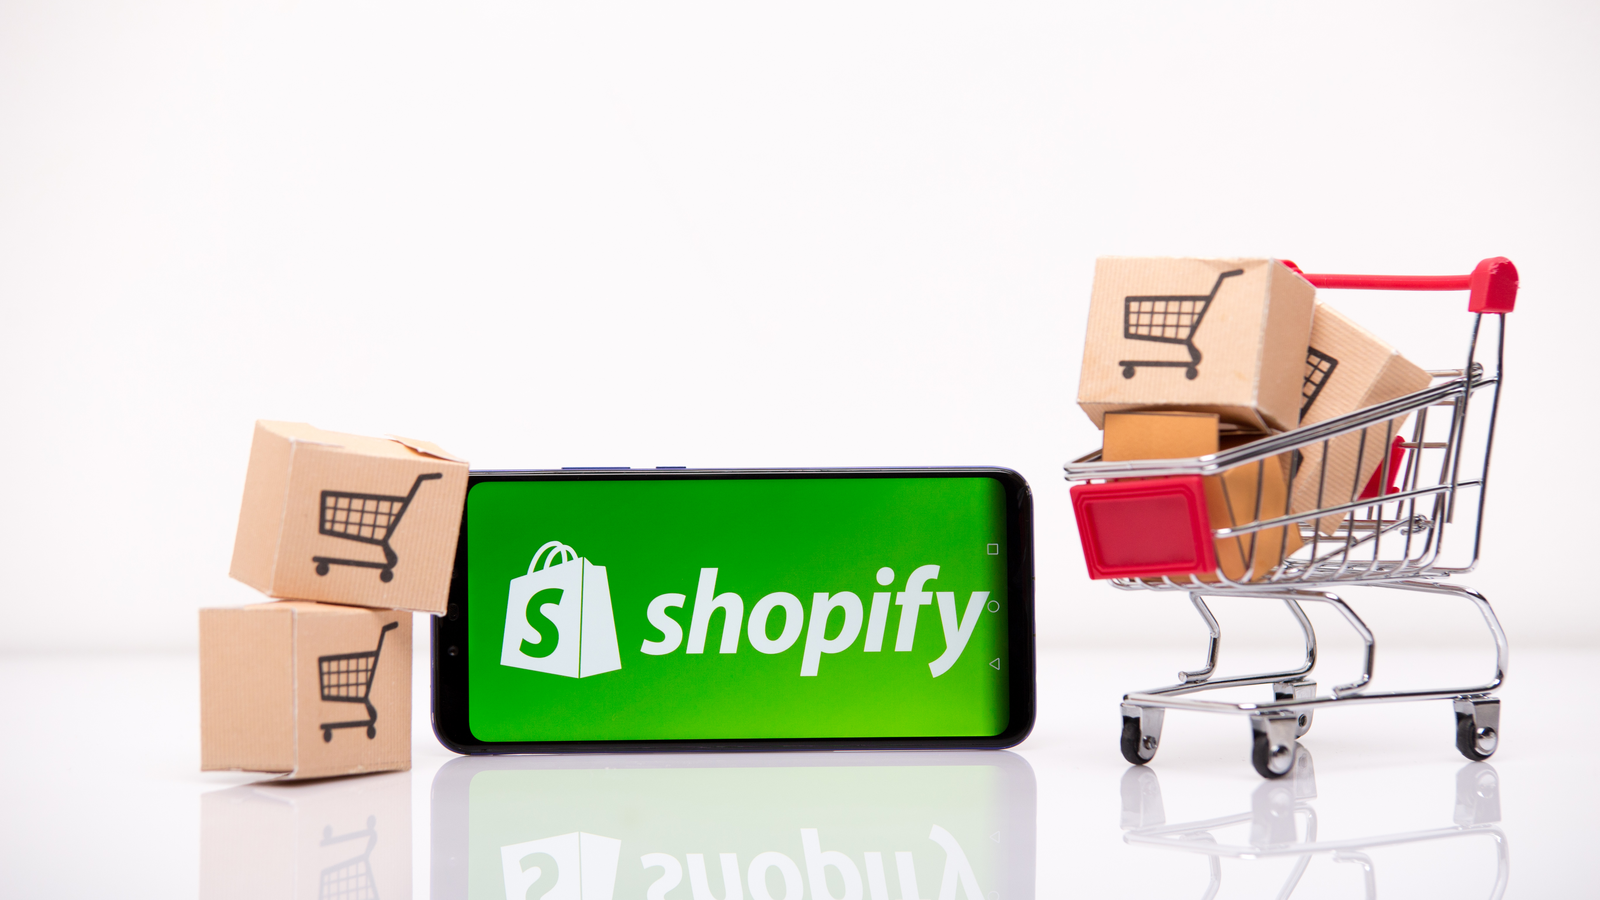 Shopify (SHOP) on the phone display.